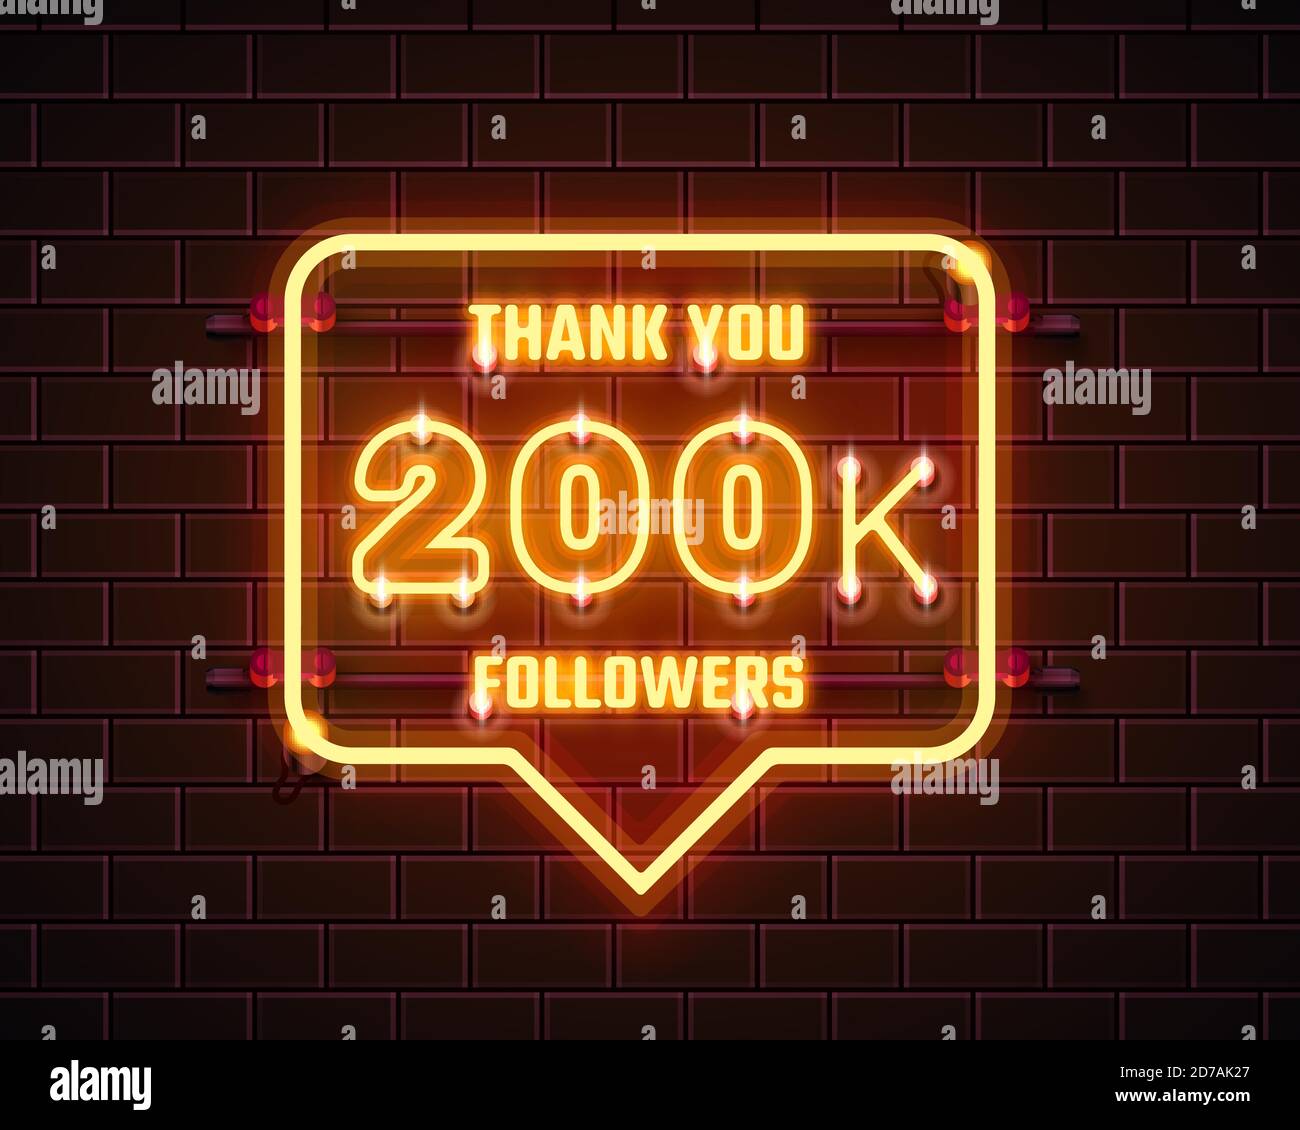 Thank you followers peoples, 200k online social group, happy banner celebrate, Vector illustration Stock Vector